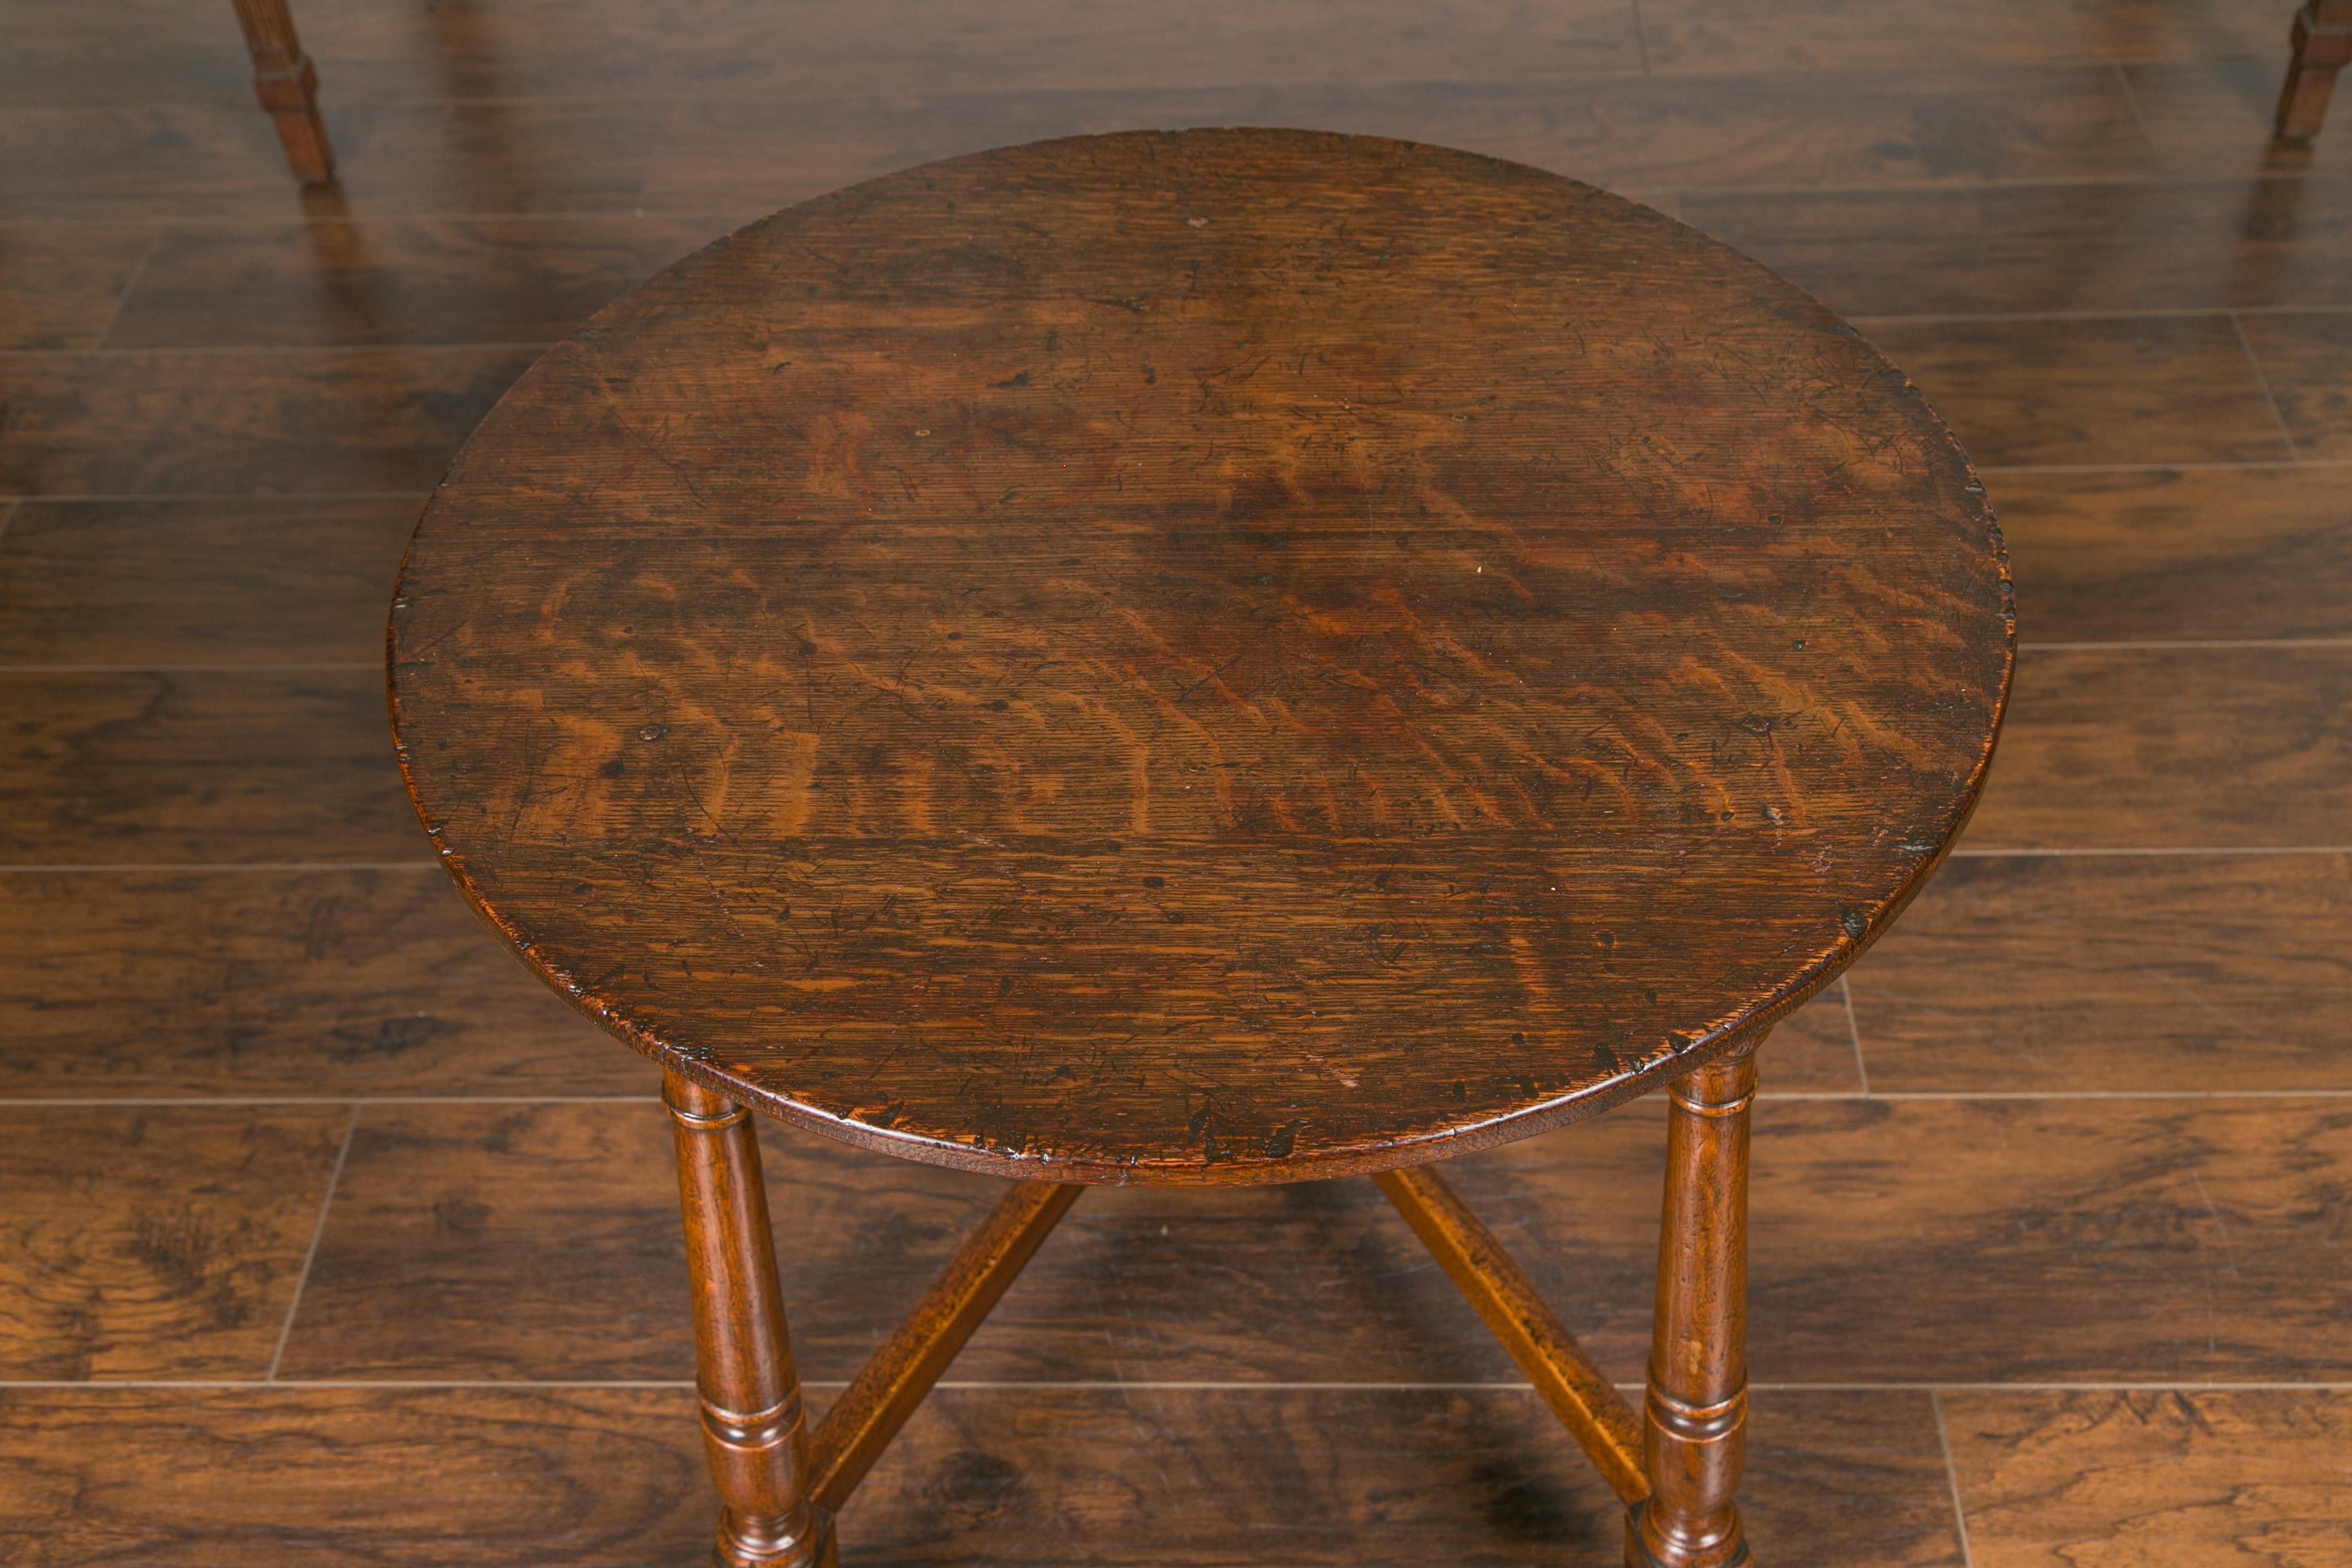 19th Century English 1840s Oak Cricket Table with Circular Top, Turned Legs and Stretchers